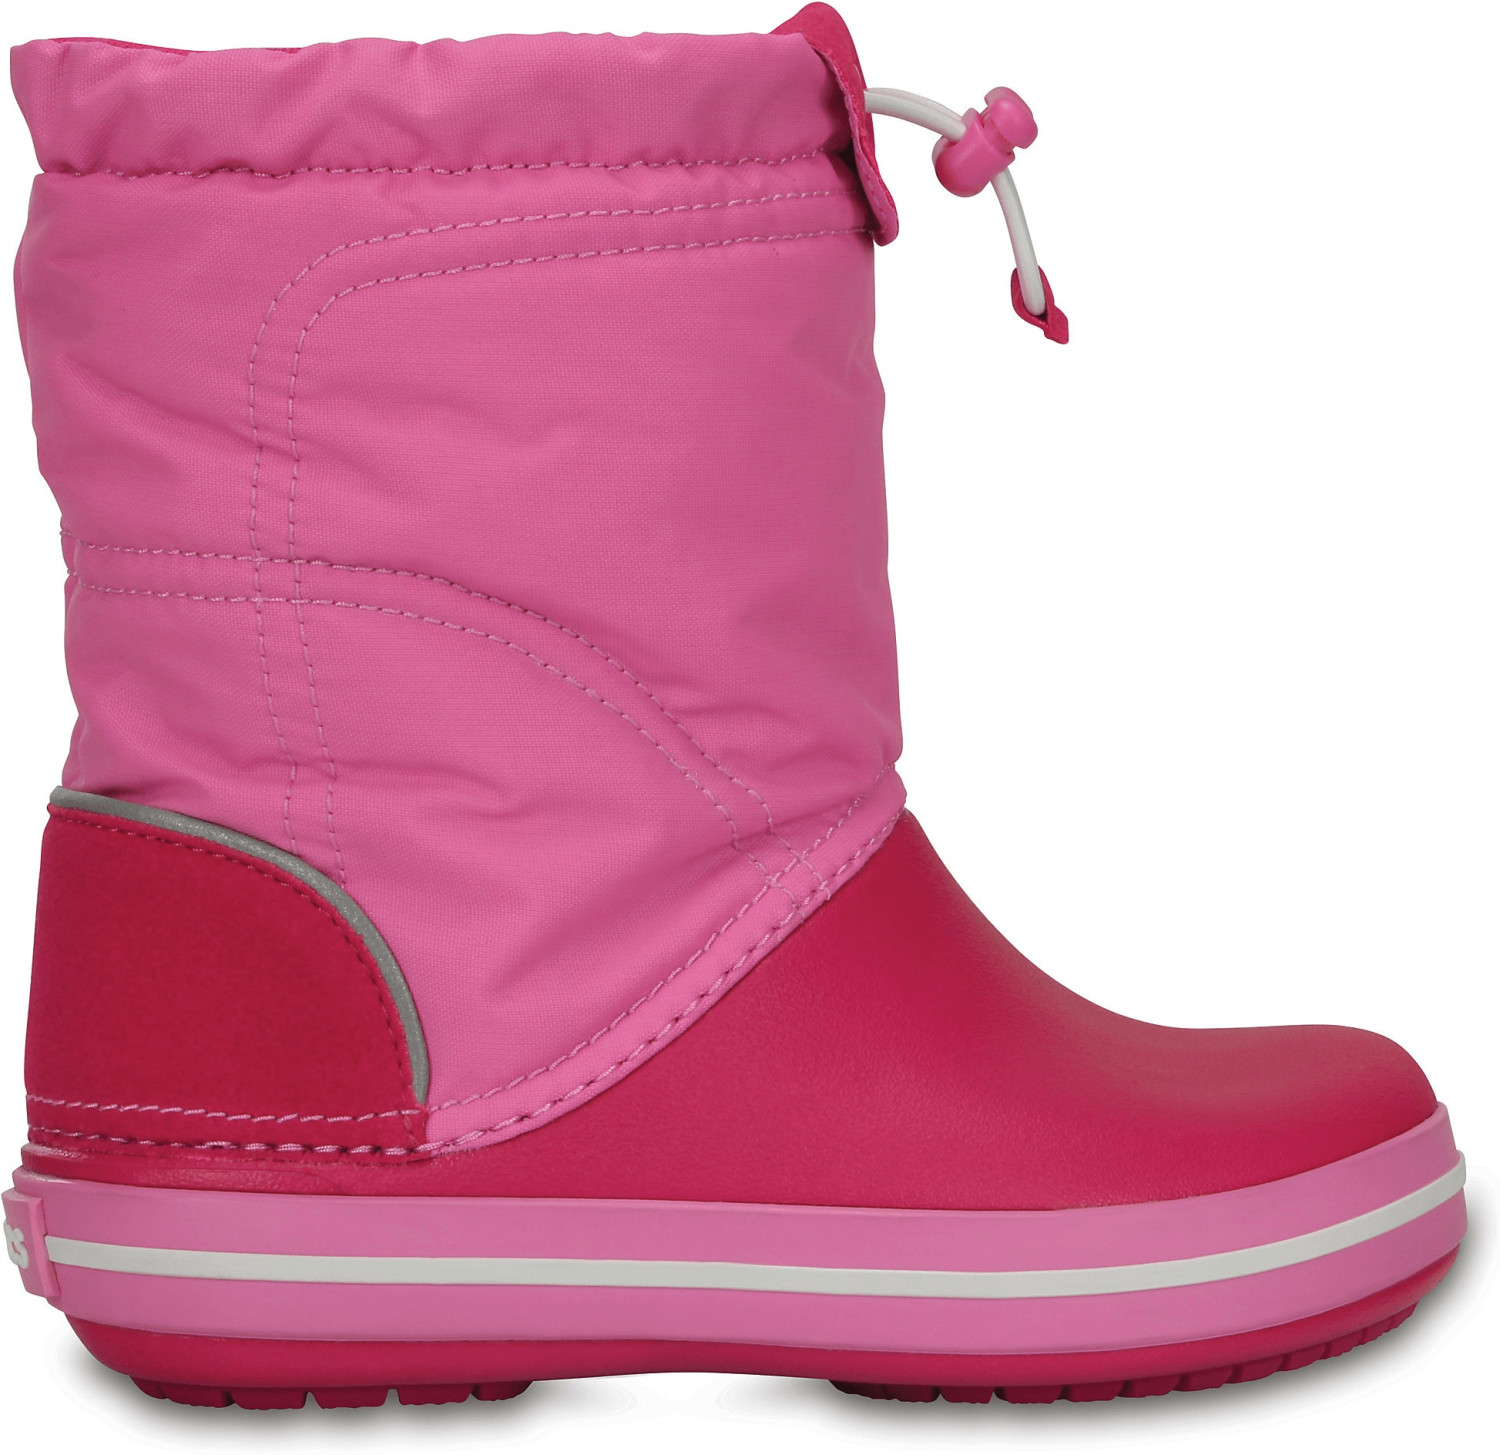 Crocs Kids Crocband LodgePoint Boot candy pink/party pink